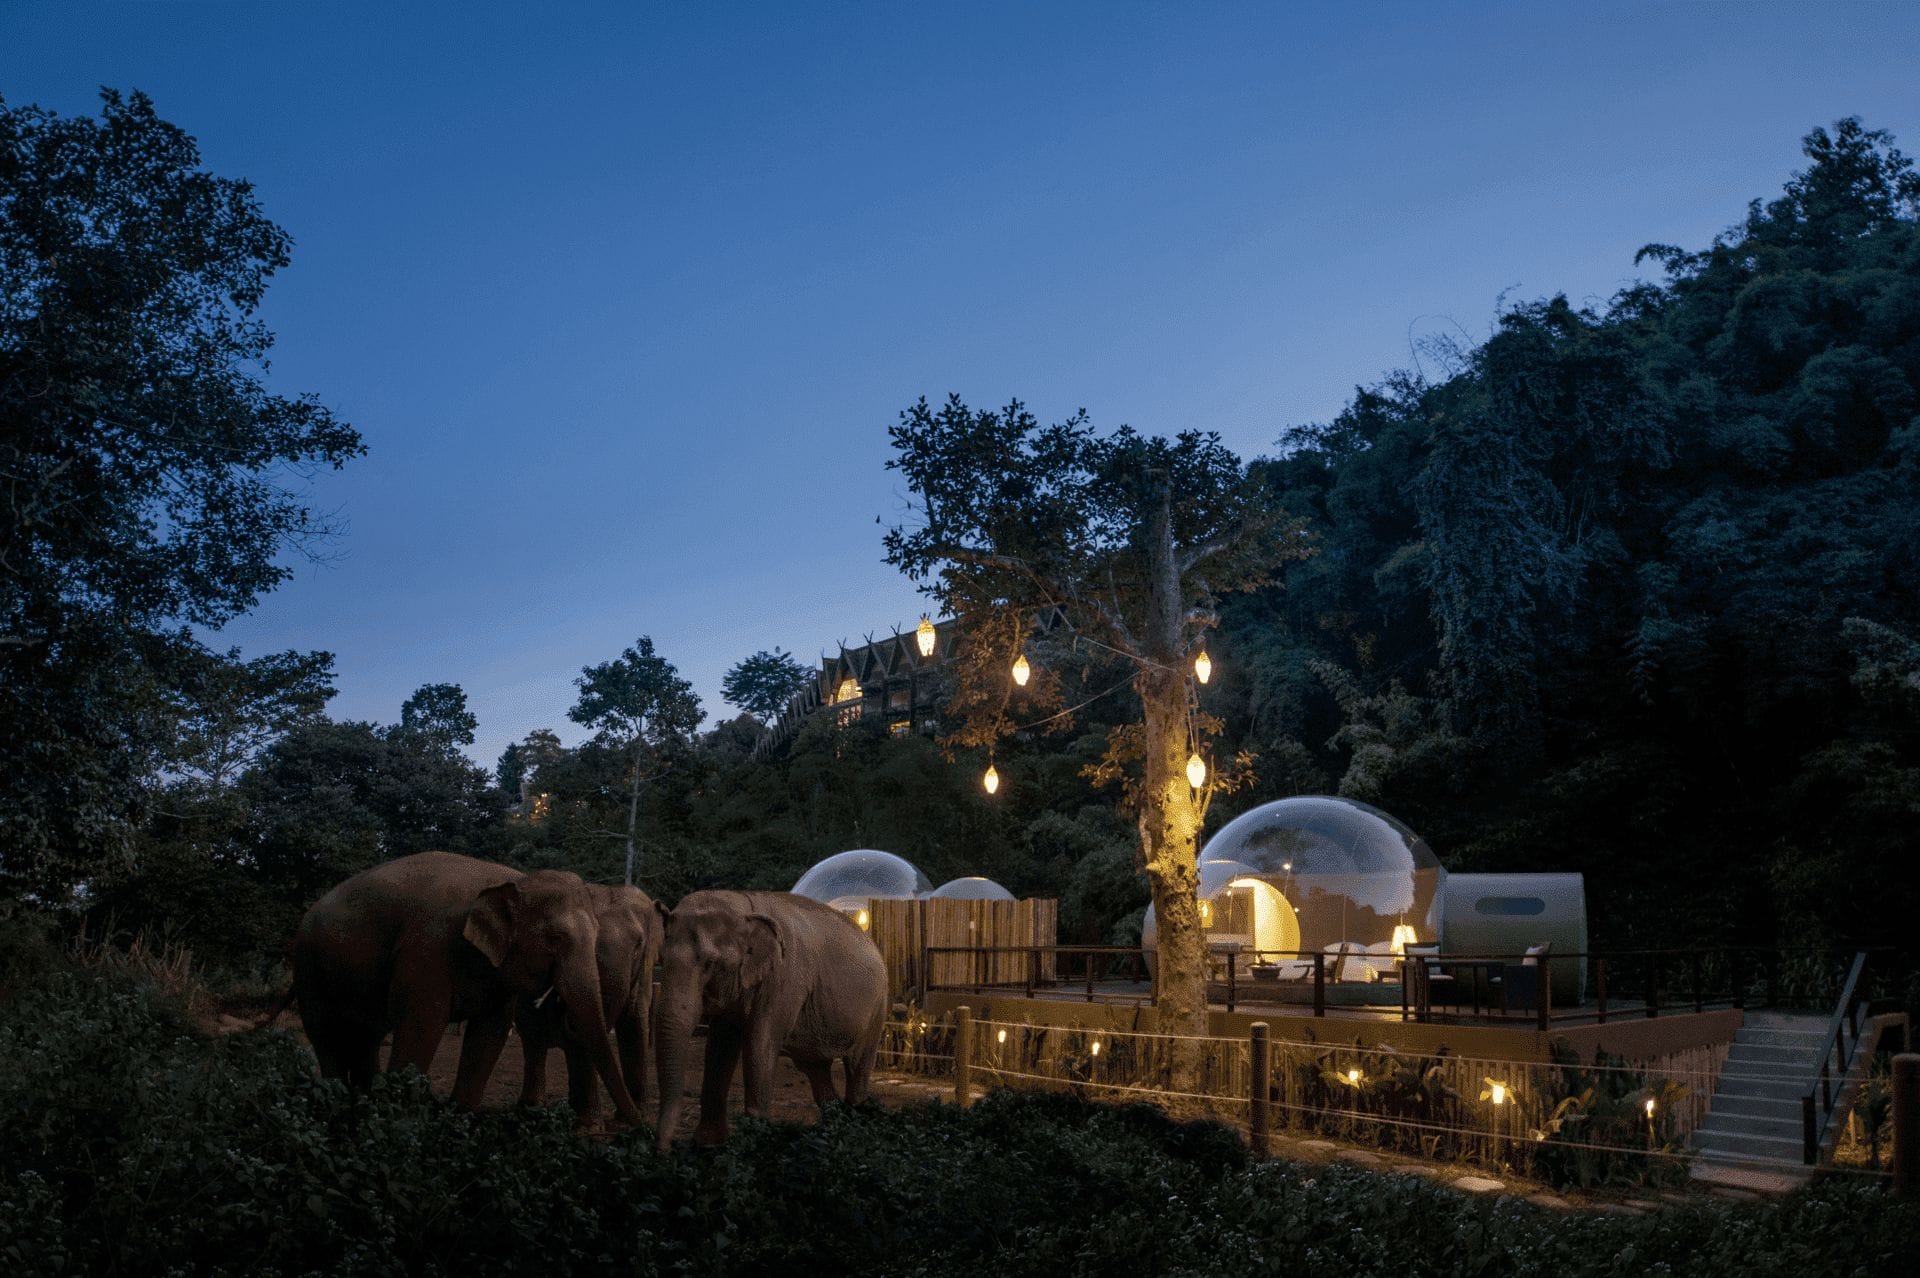 Elephants in bubble lodges in the jungle